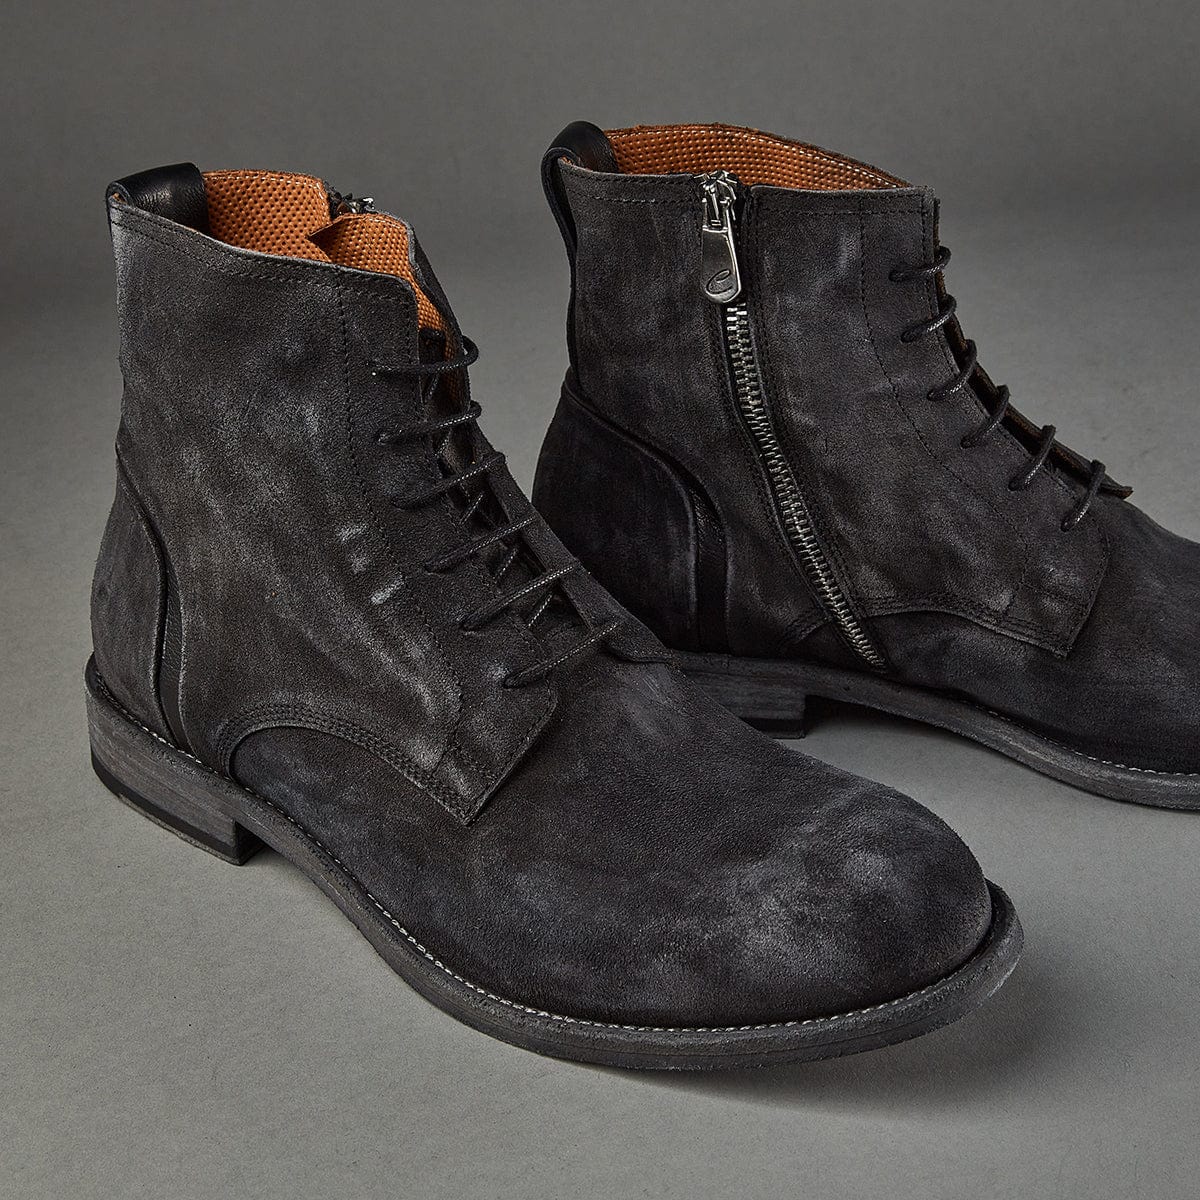 Conflict For Interest Ankle Boot Conflict For Interest Catanzaro Black